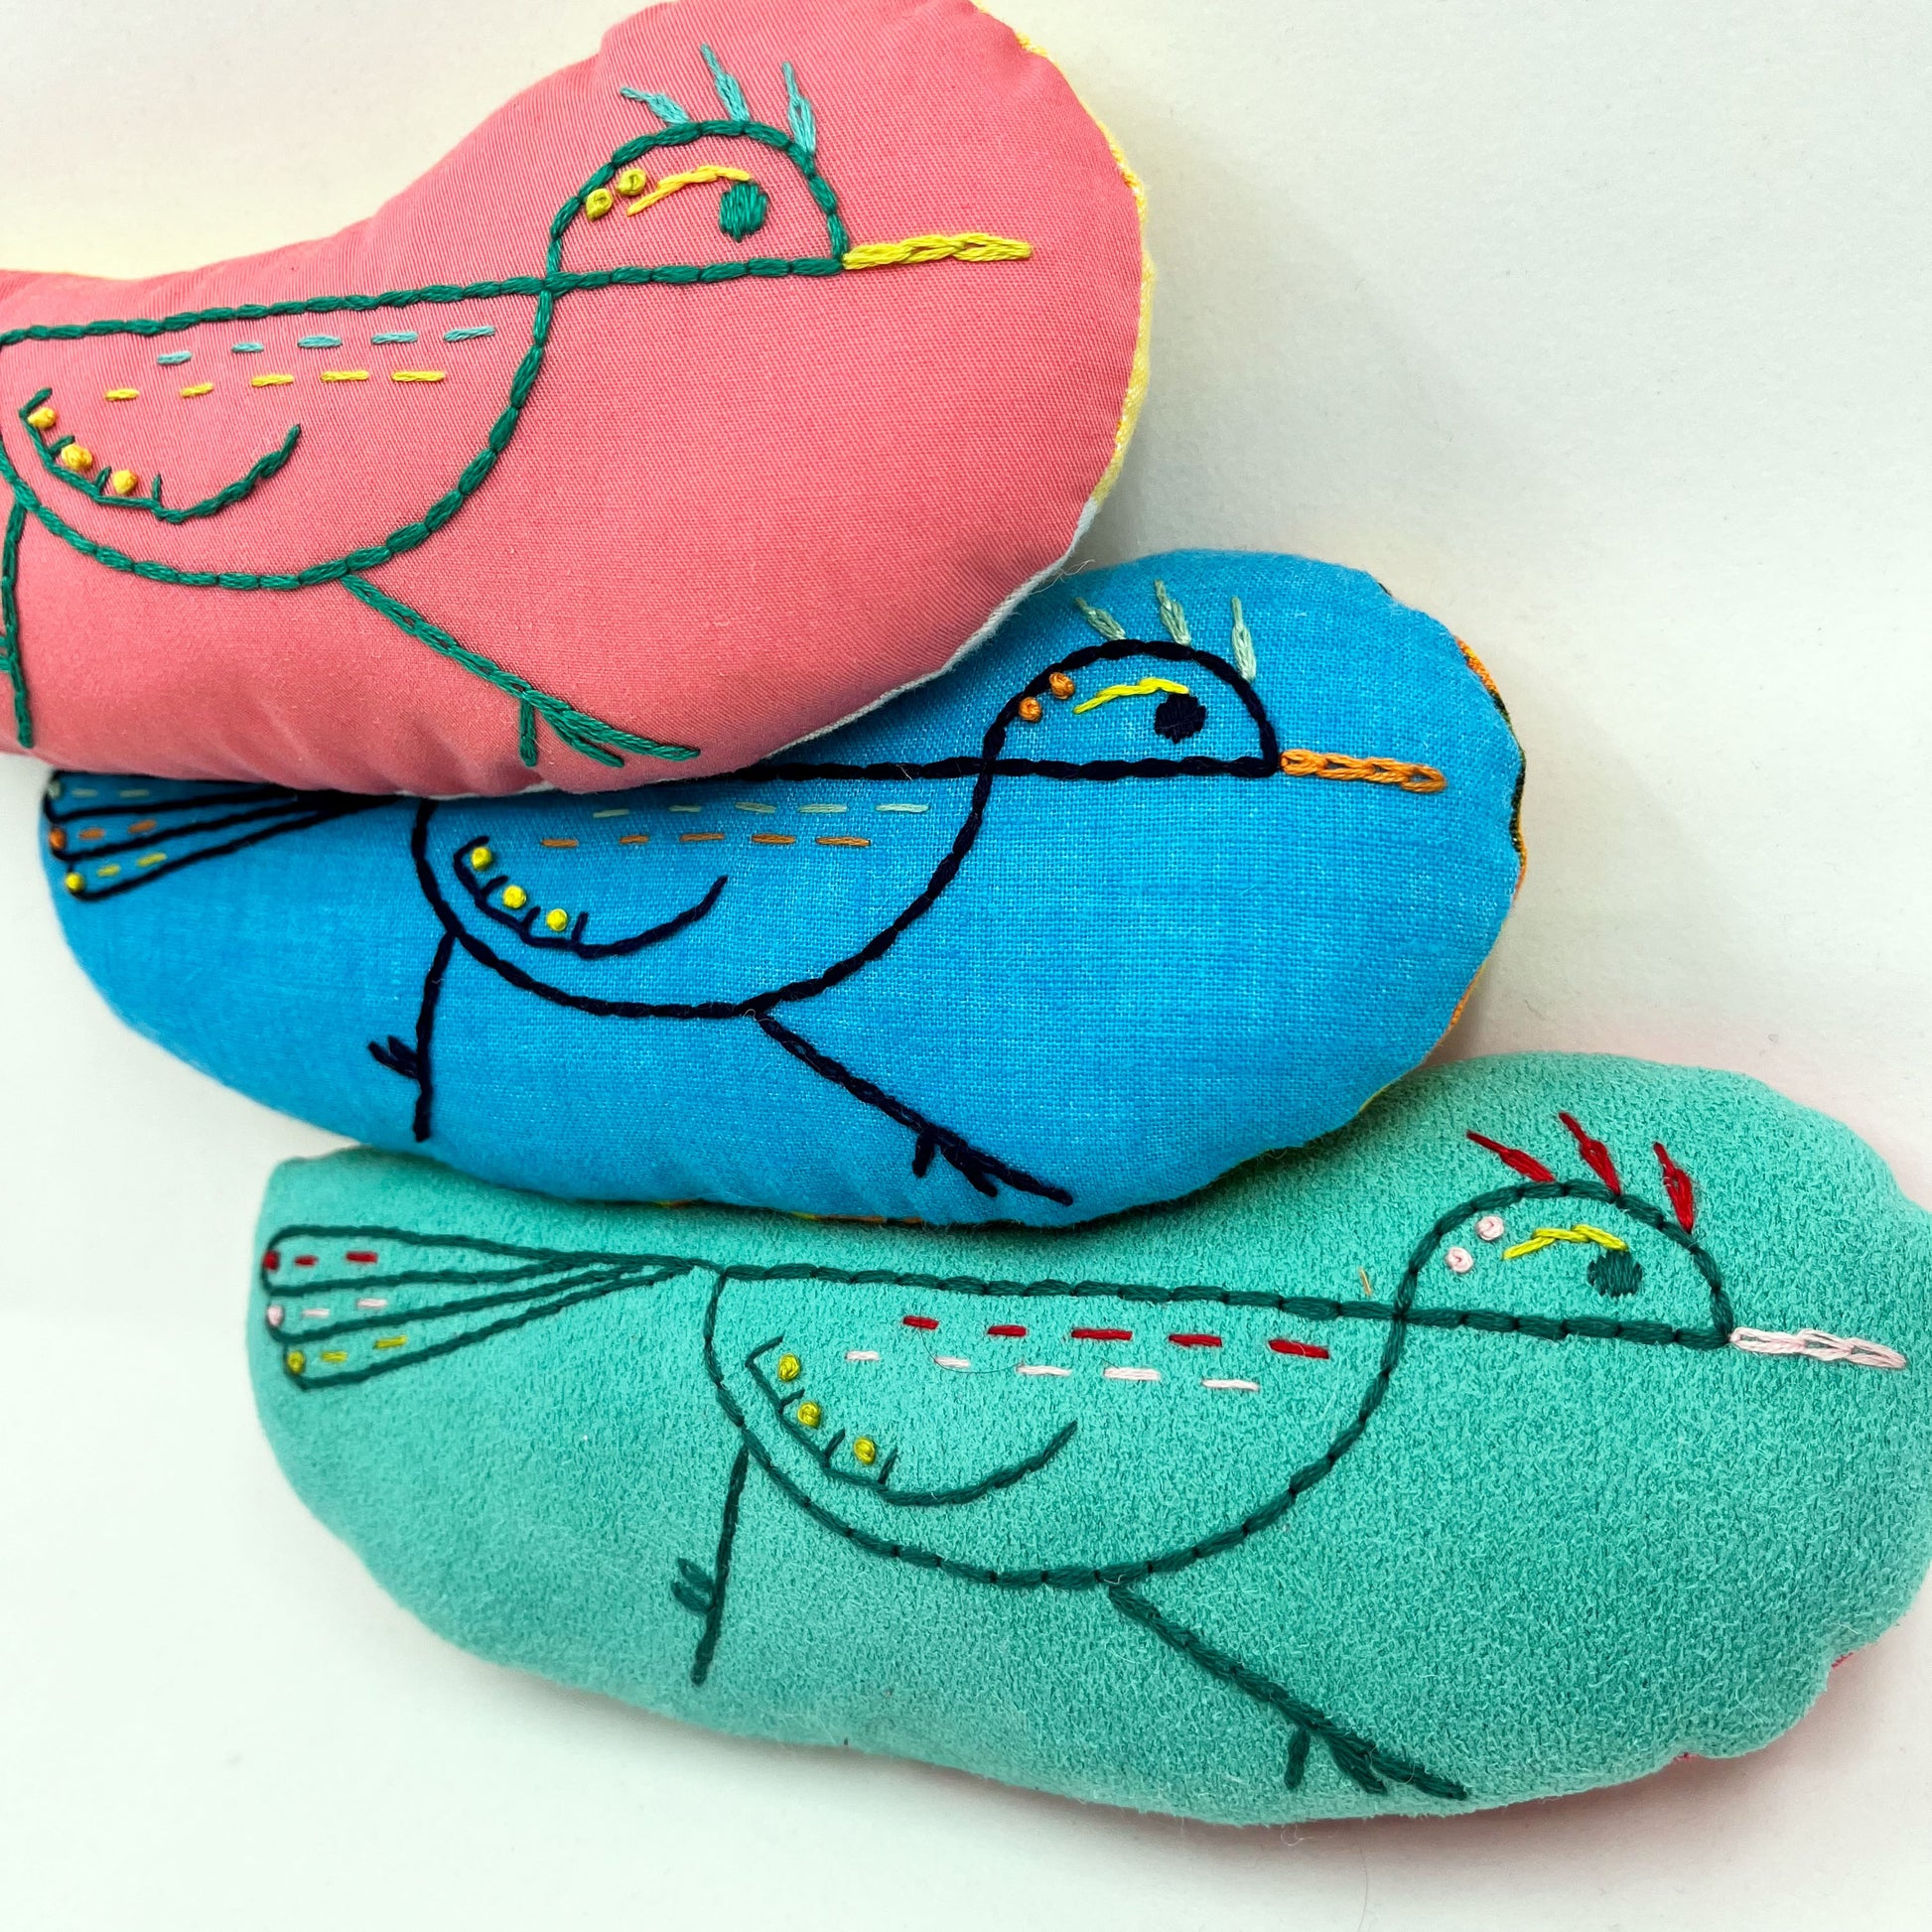 a group of colorfully hand embroidered roadrunner stuffed animal pillows in blue, seafoam green and coral fabric, in a pile on a white background